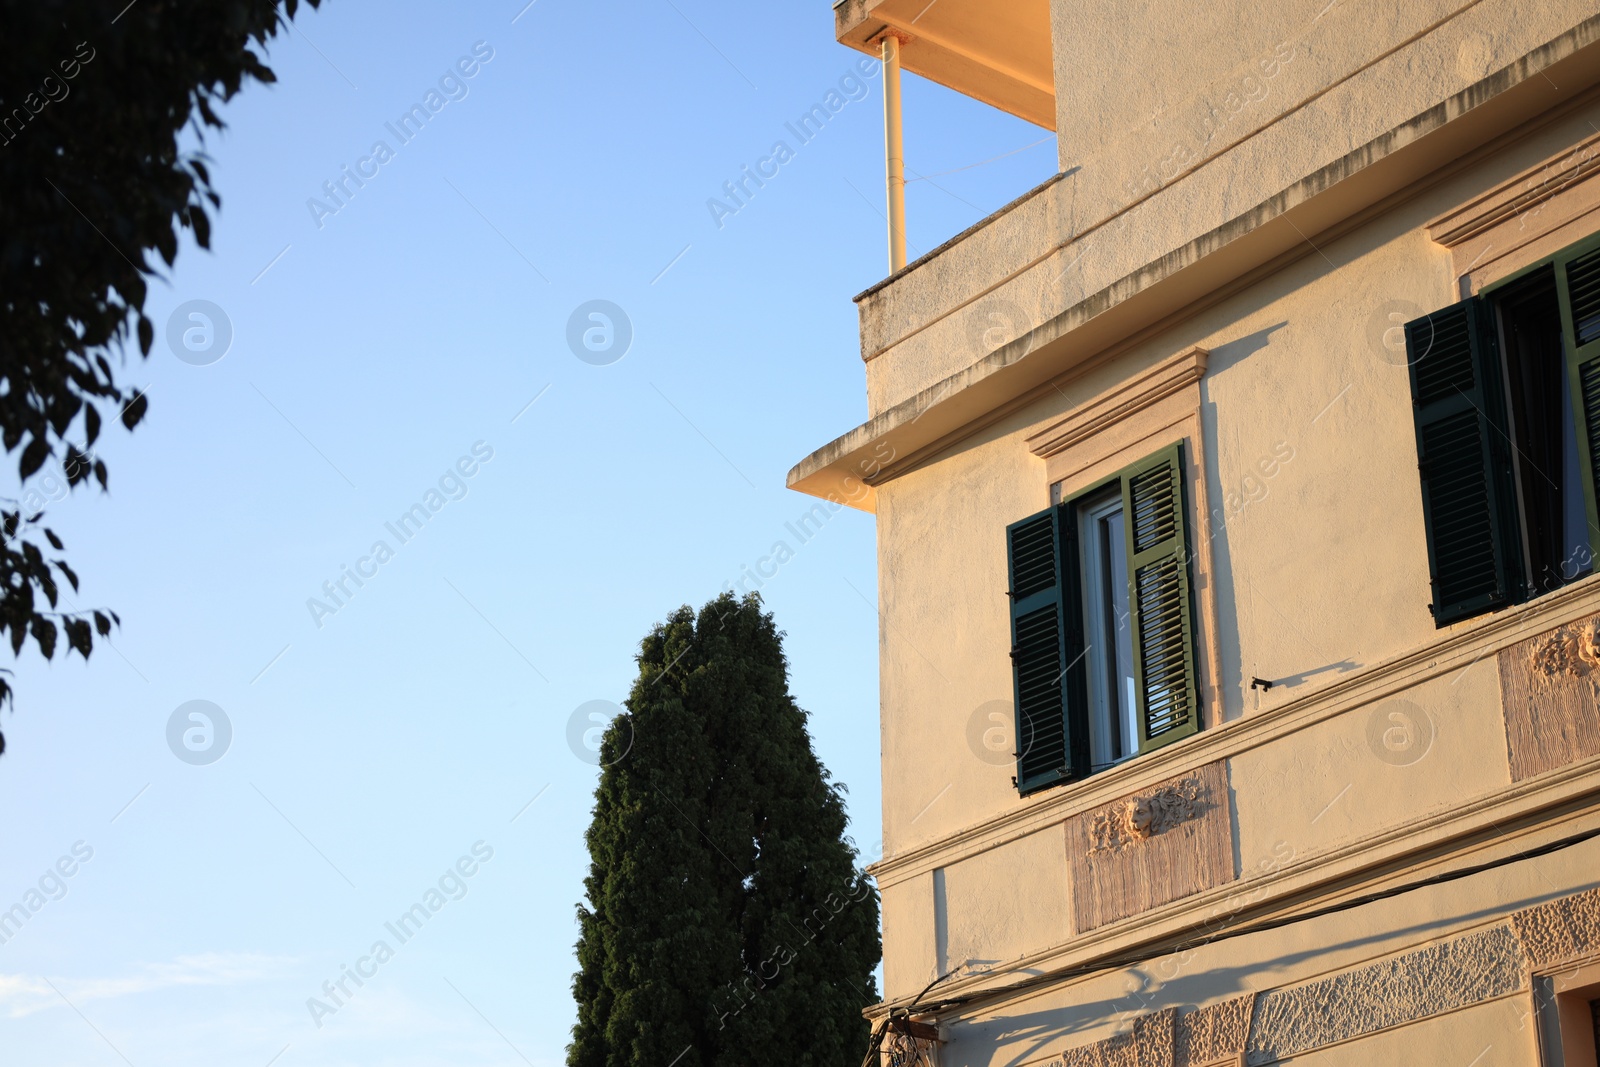 Photo of Residential building with wooden shutters on windows under blue sky